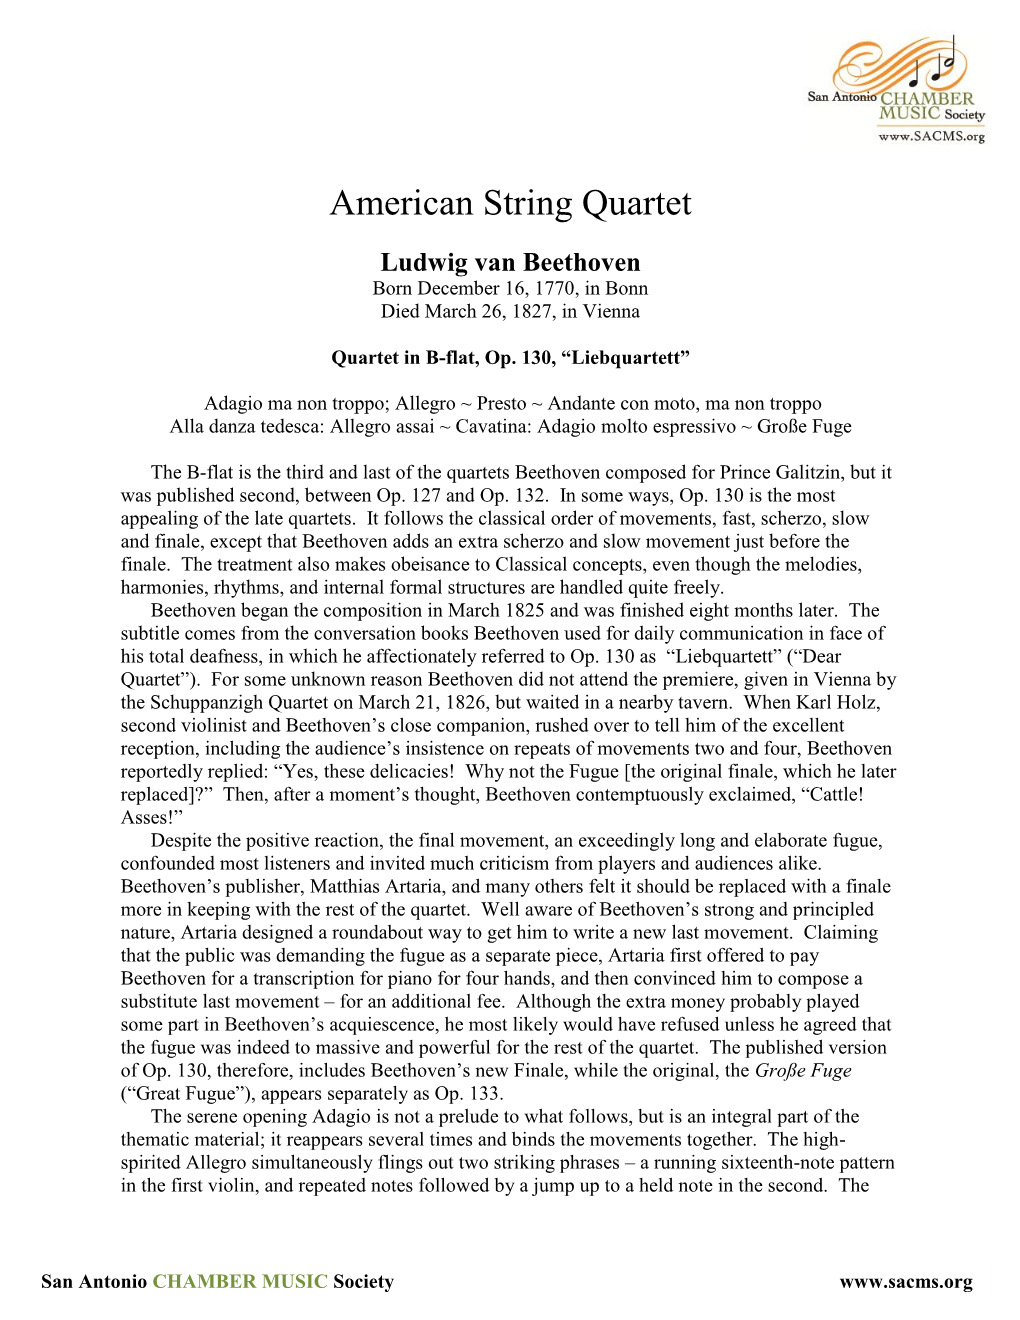 On Monday, February 18, 2008, the Orion String Quartet Presented Two Educational Outreach Concerts for the San Antonio Chamber